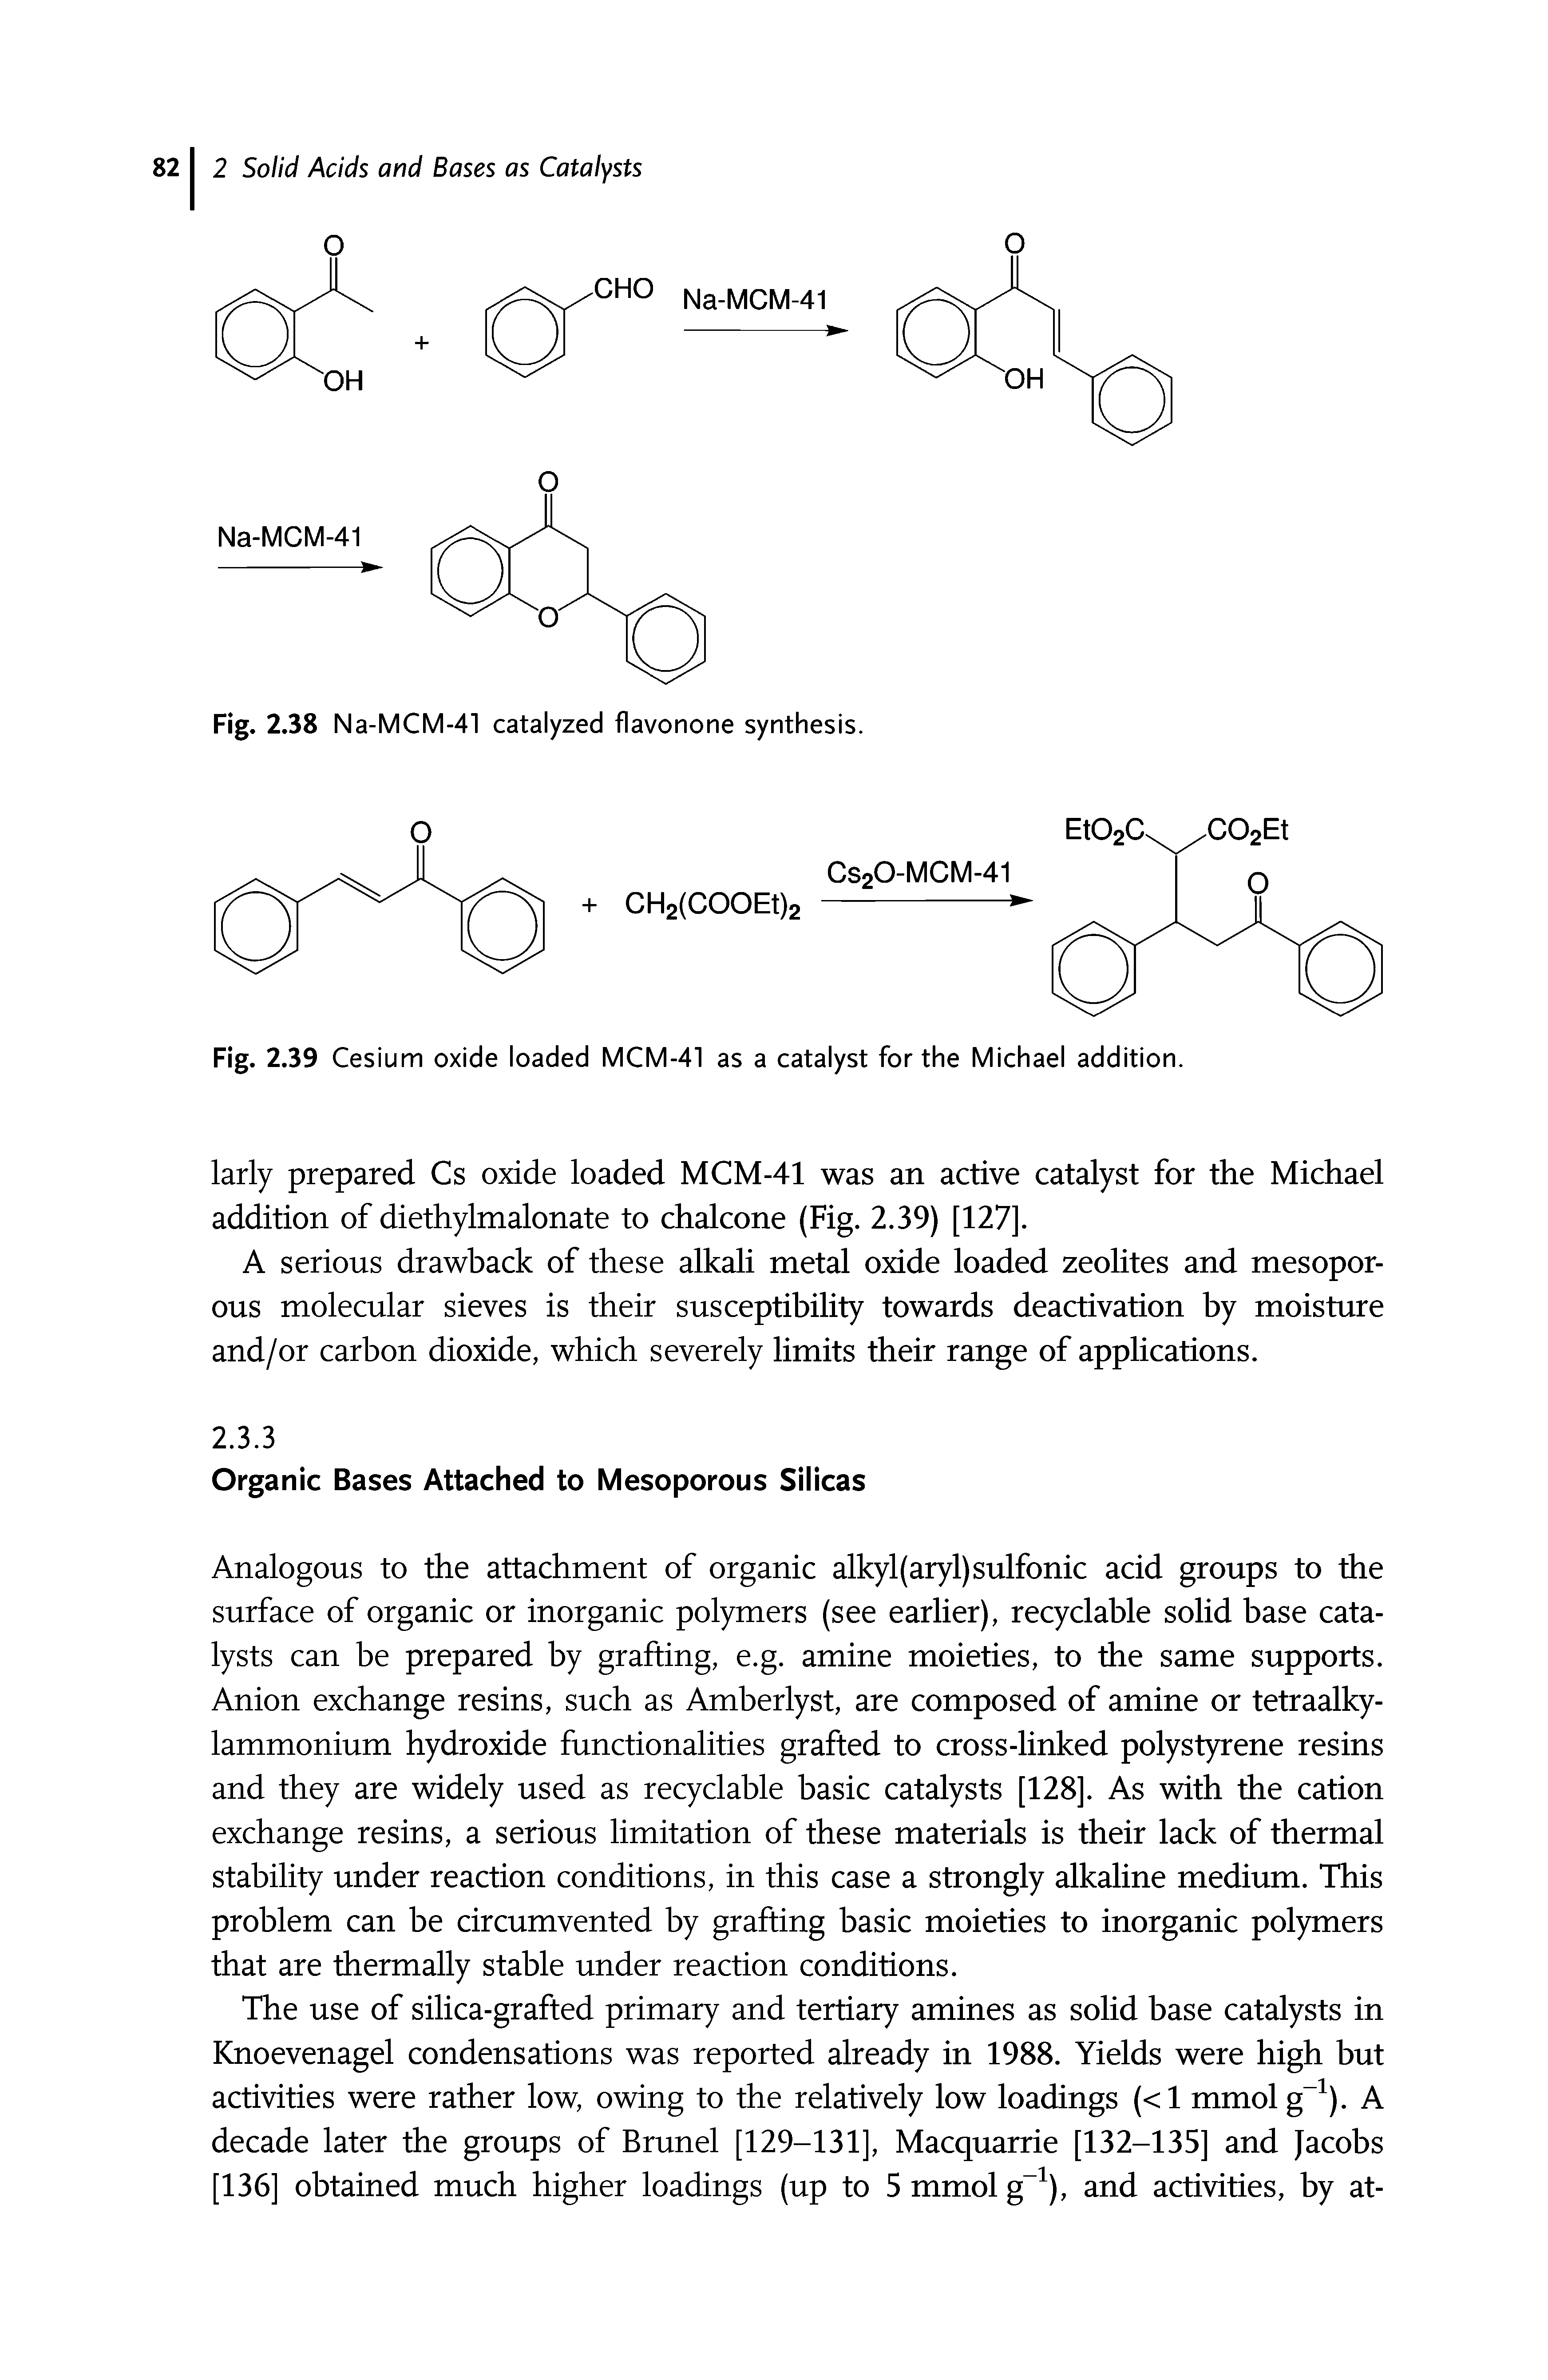 Fig. 2.39 Cesium oxide loaded MCM-41 as a catalyst for the Michael addition.